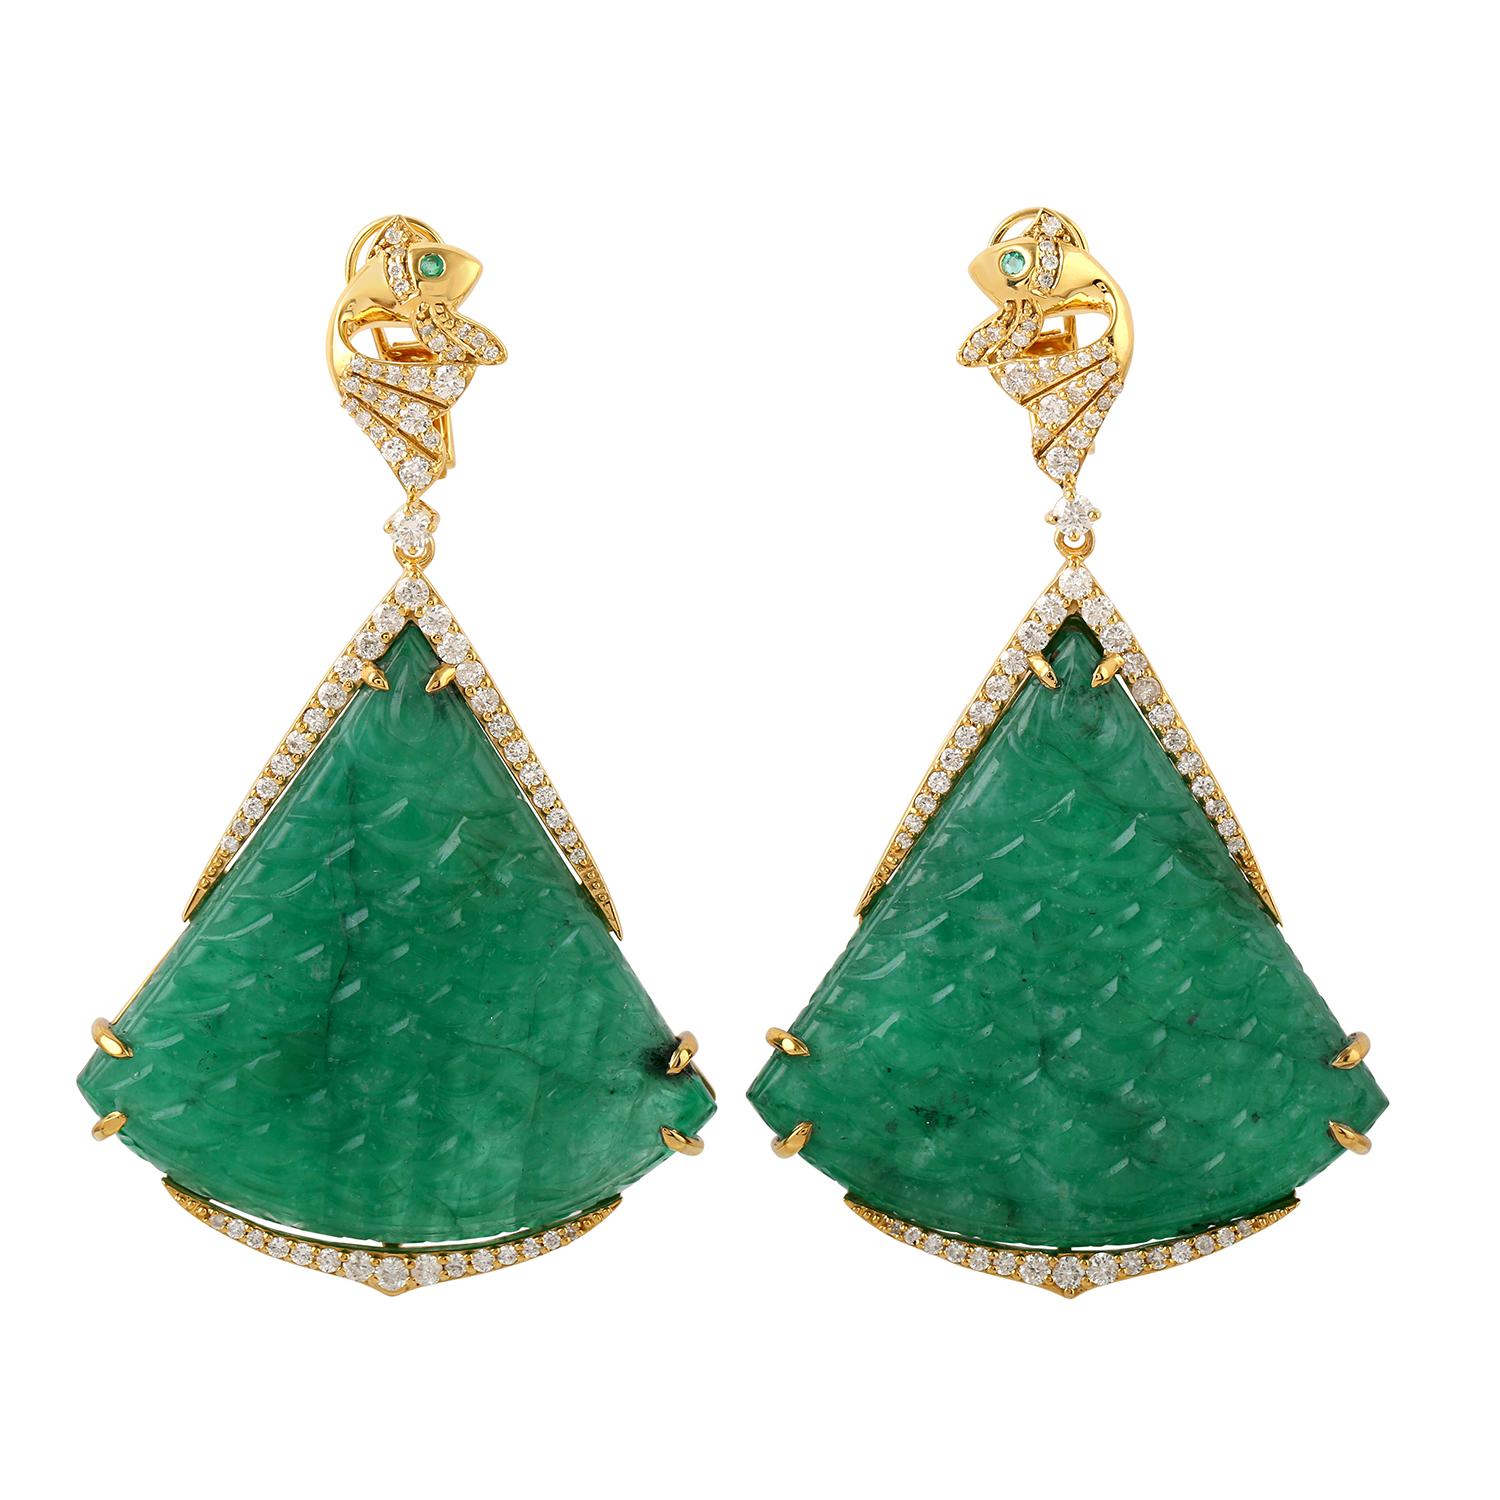 Contemporary 106.99ct Anchor Resembling Shaped Emerald Dangle Earrings With Diamonds For Sale